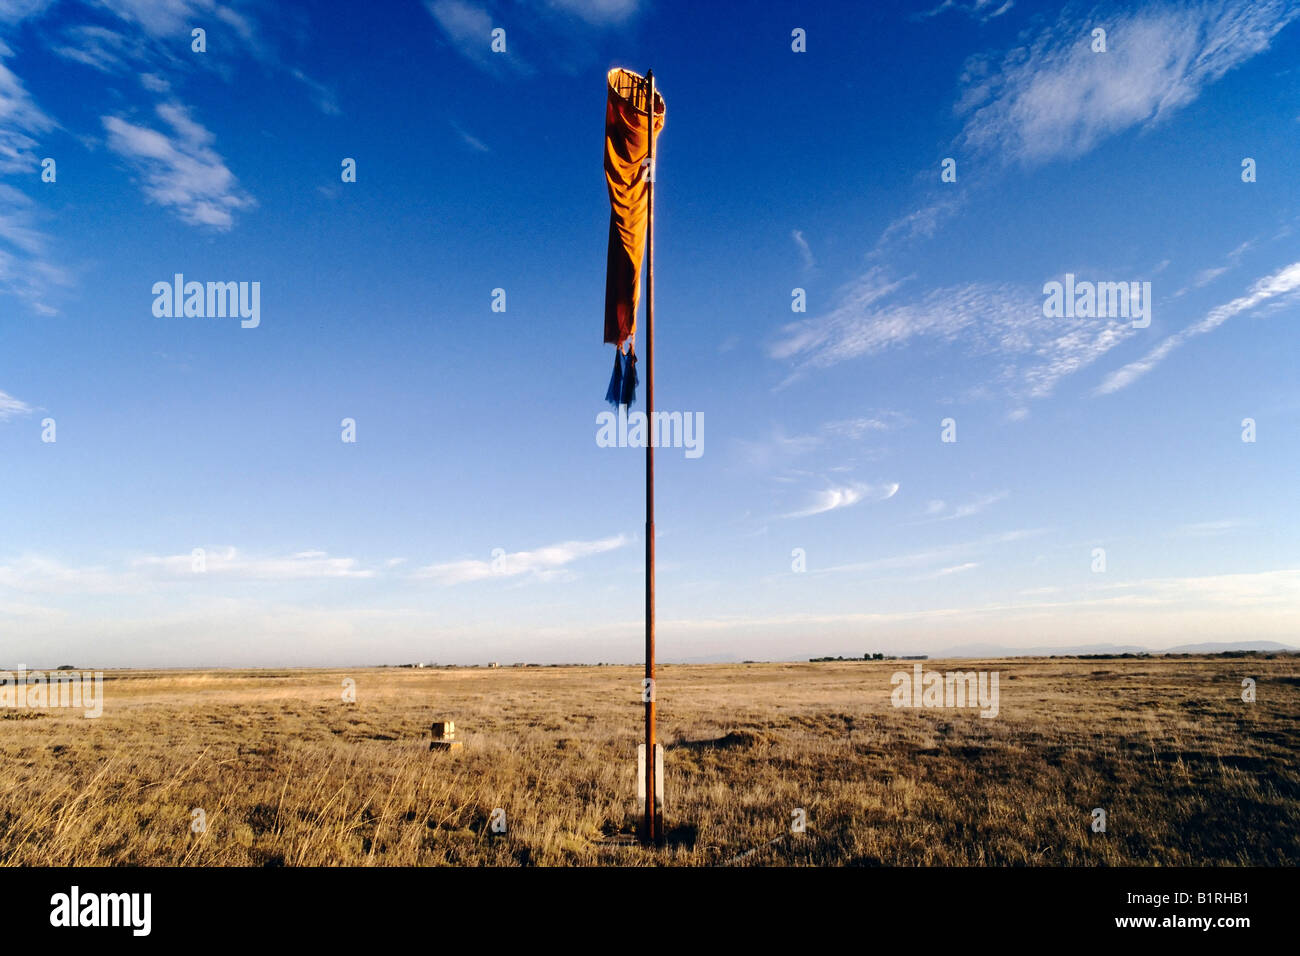 Limp windsock hanging from a pole in the veld of the Little Karoo in Western Cape, South Africa Stock Photo